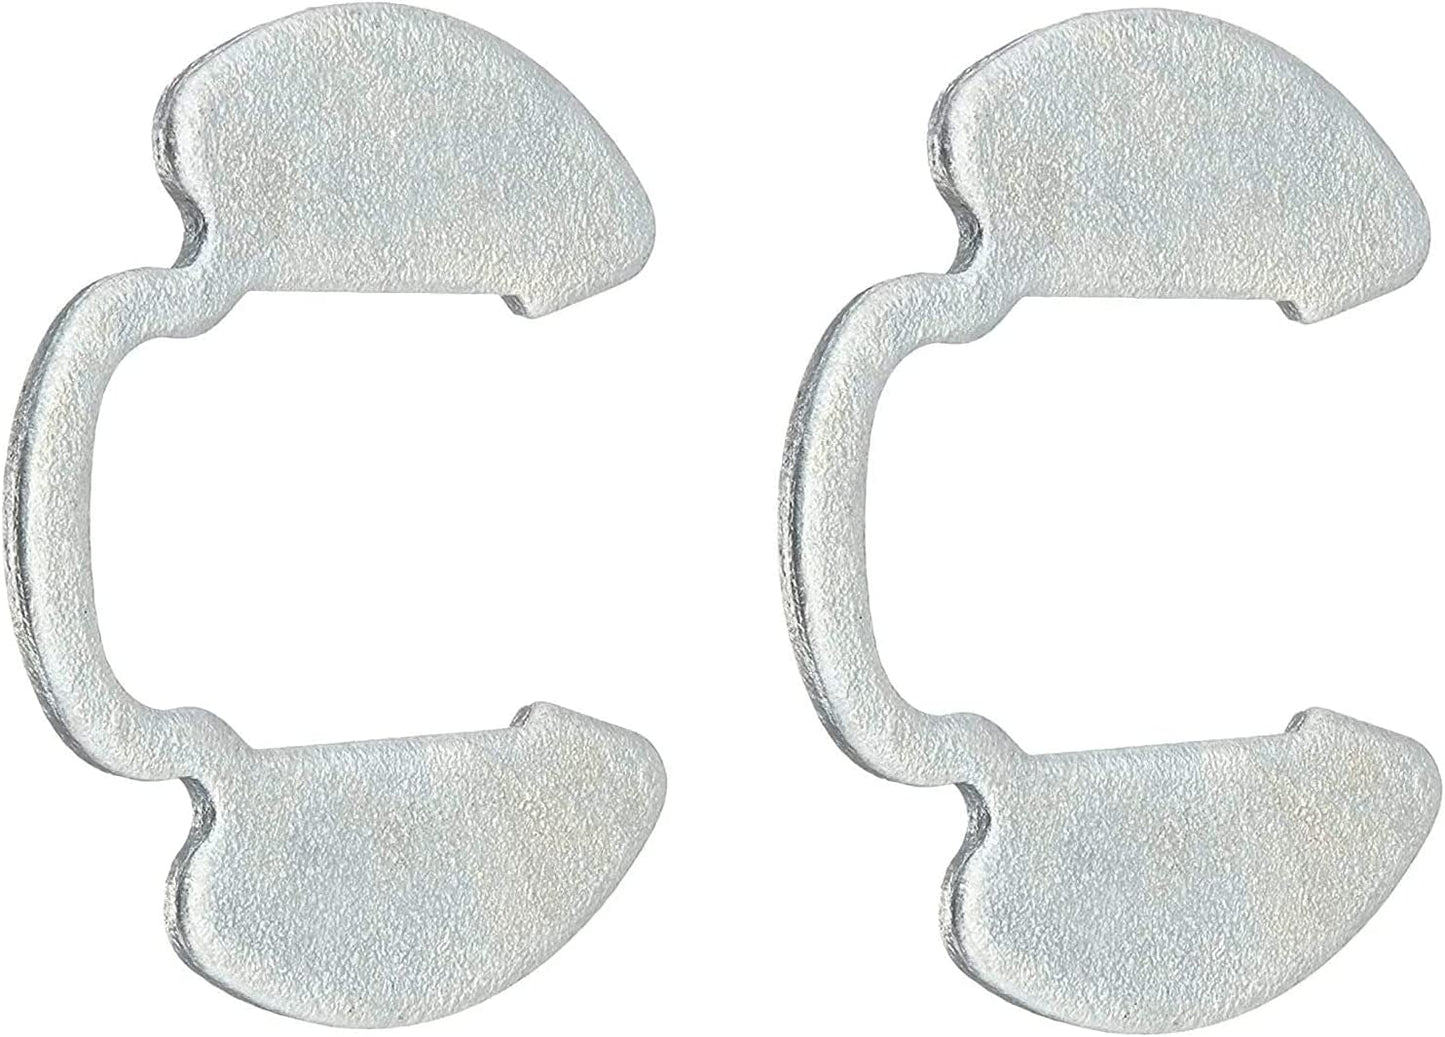 Lifetime Appliance 2 x W10080230 Retaining Ring Clip Compatible with Whirlpool Washer